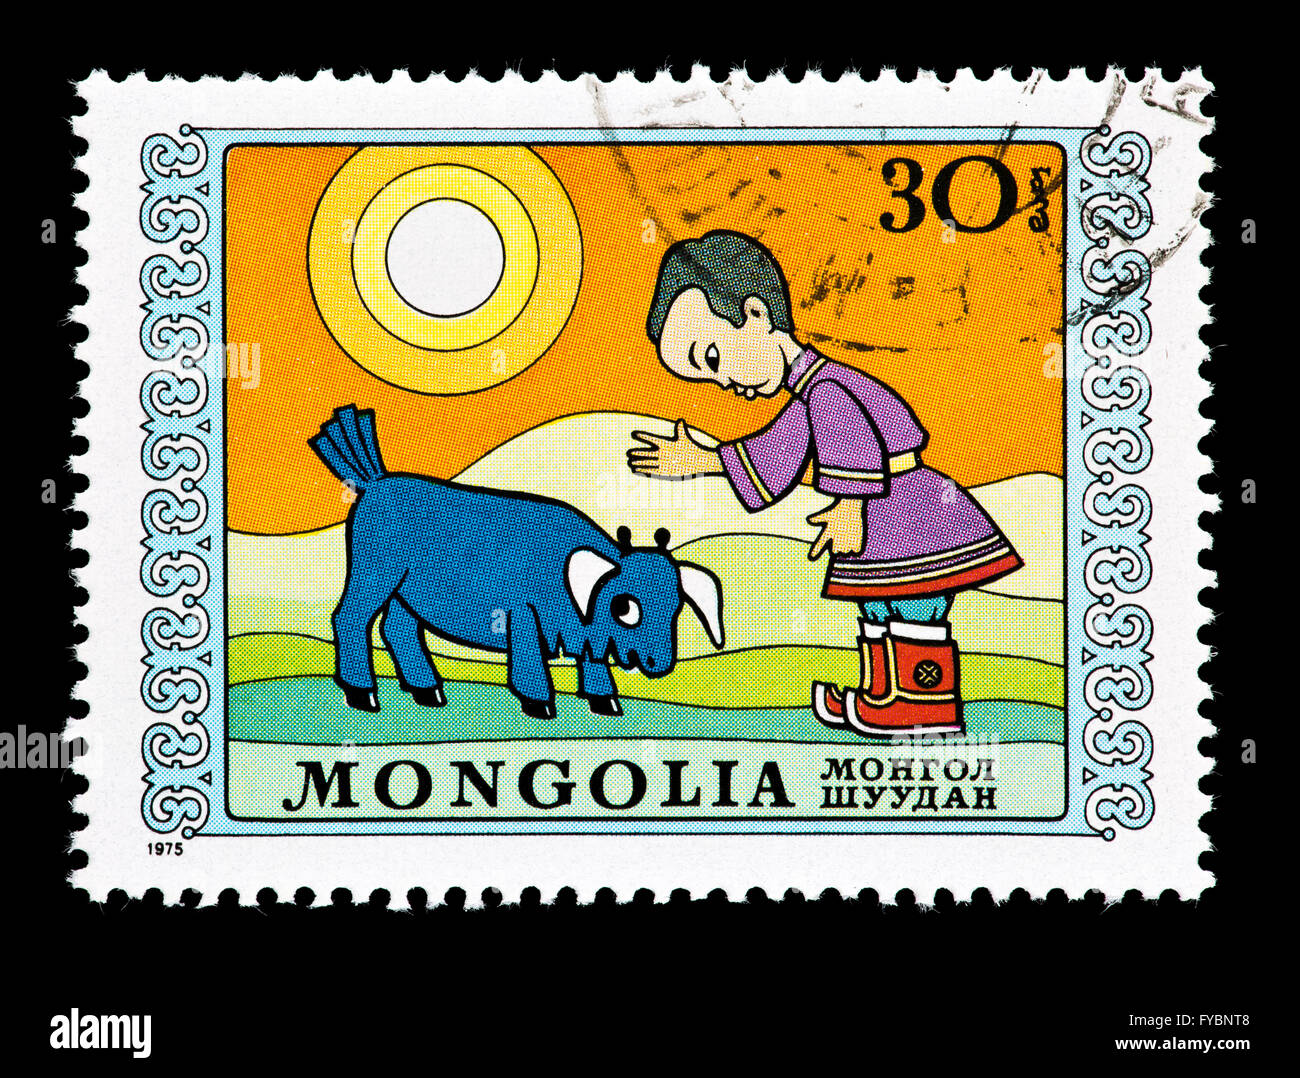 Postage stamp from Mongolia depicting a boy and disobedient bull. Stock Photo